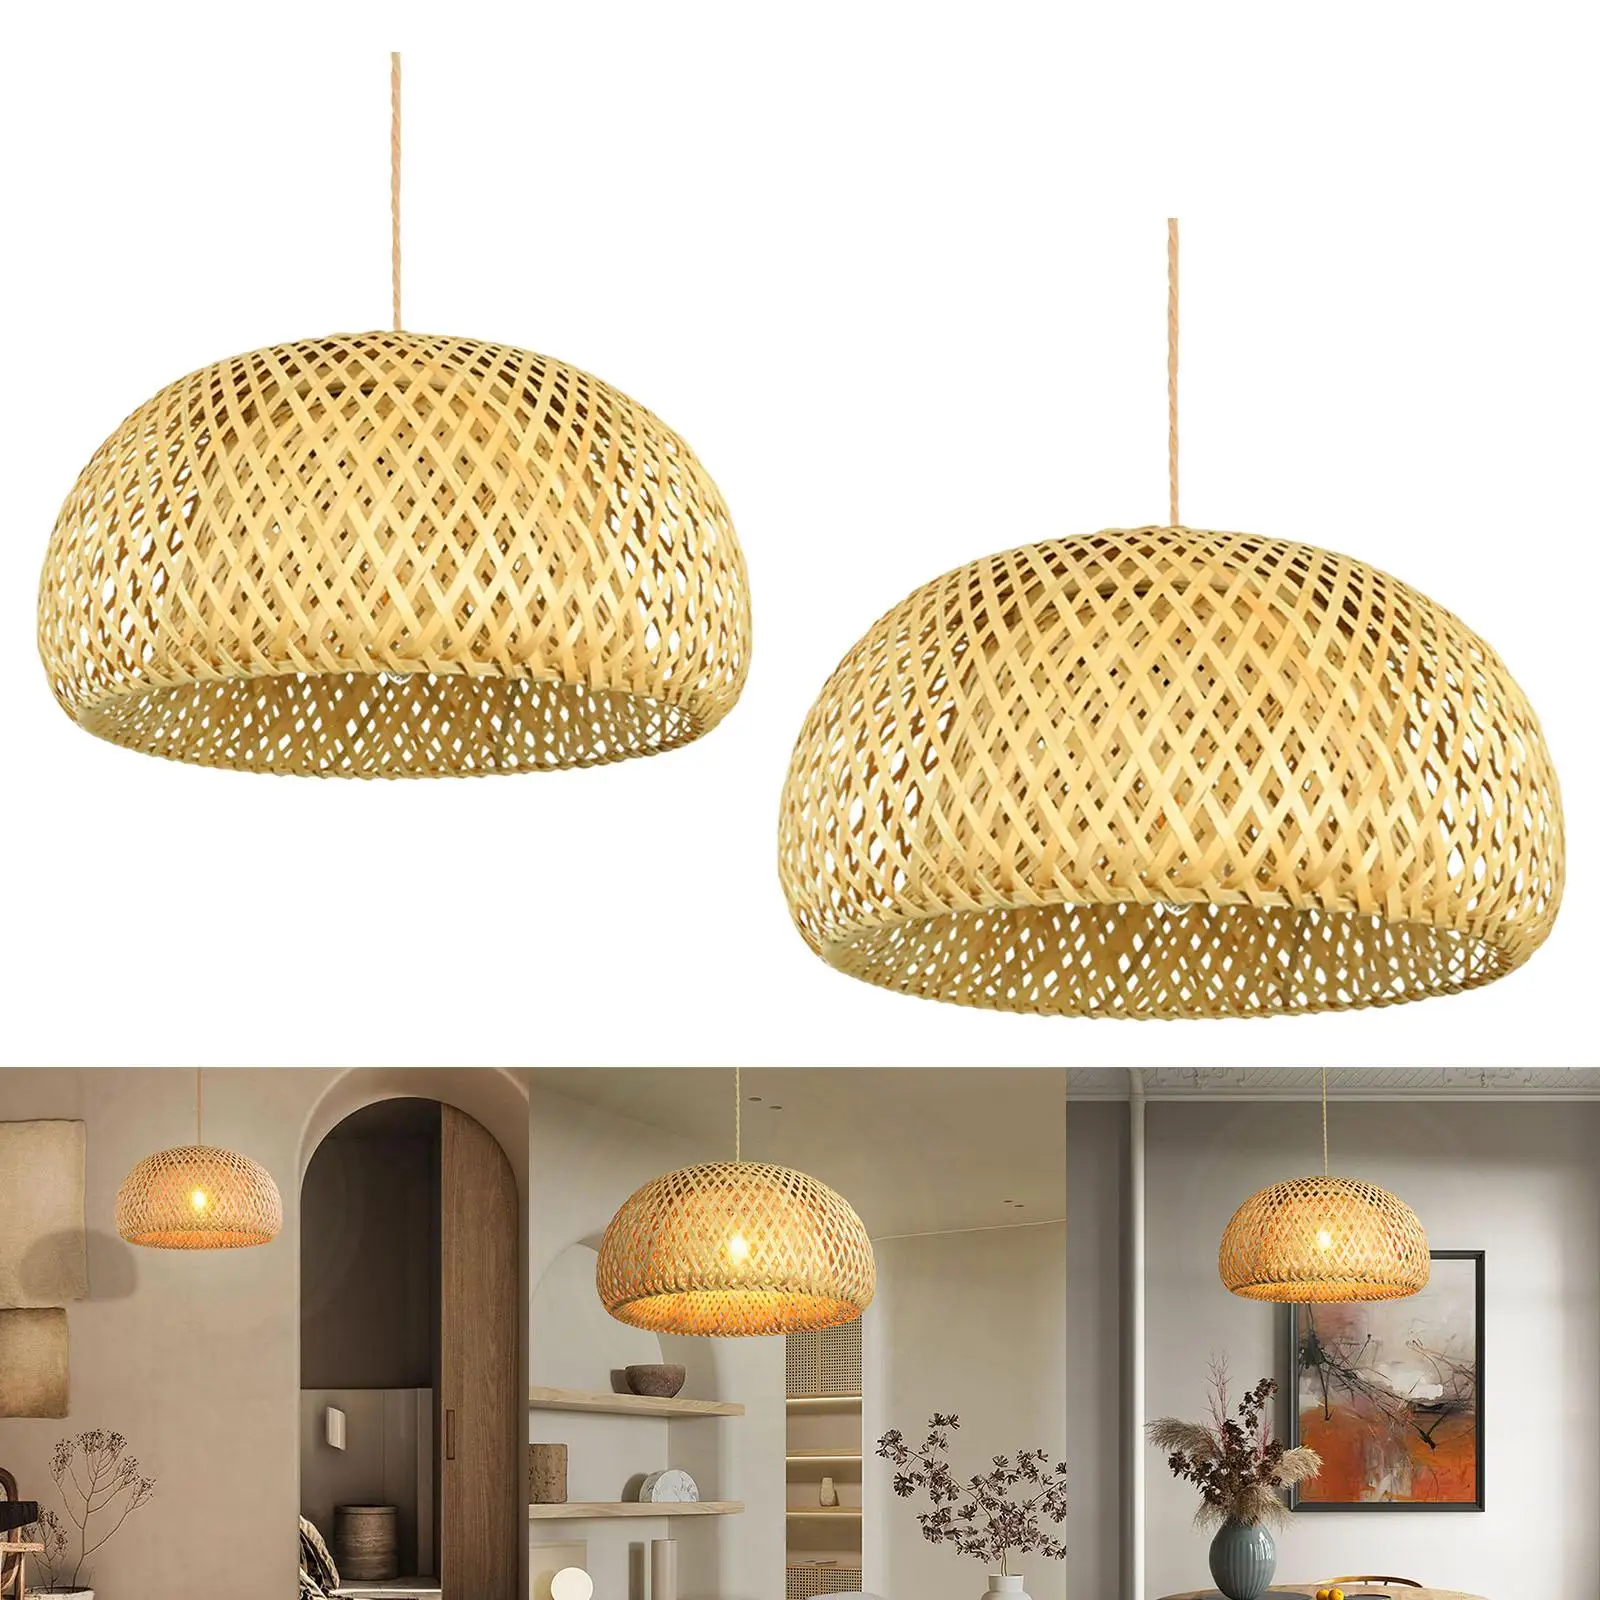 Woven Bamboo Ceiling Lights Lampshade Pendant Light Cover Natural Pendant Hanging Light Lampshade for Bar Shop Office Restaurant